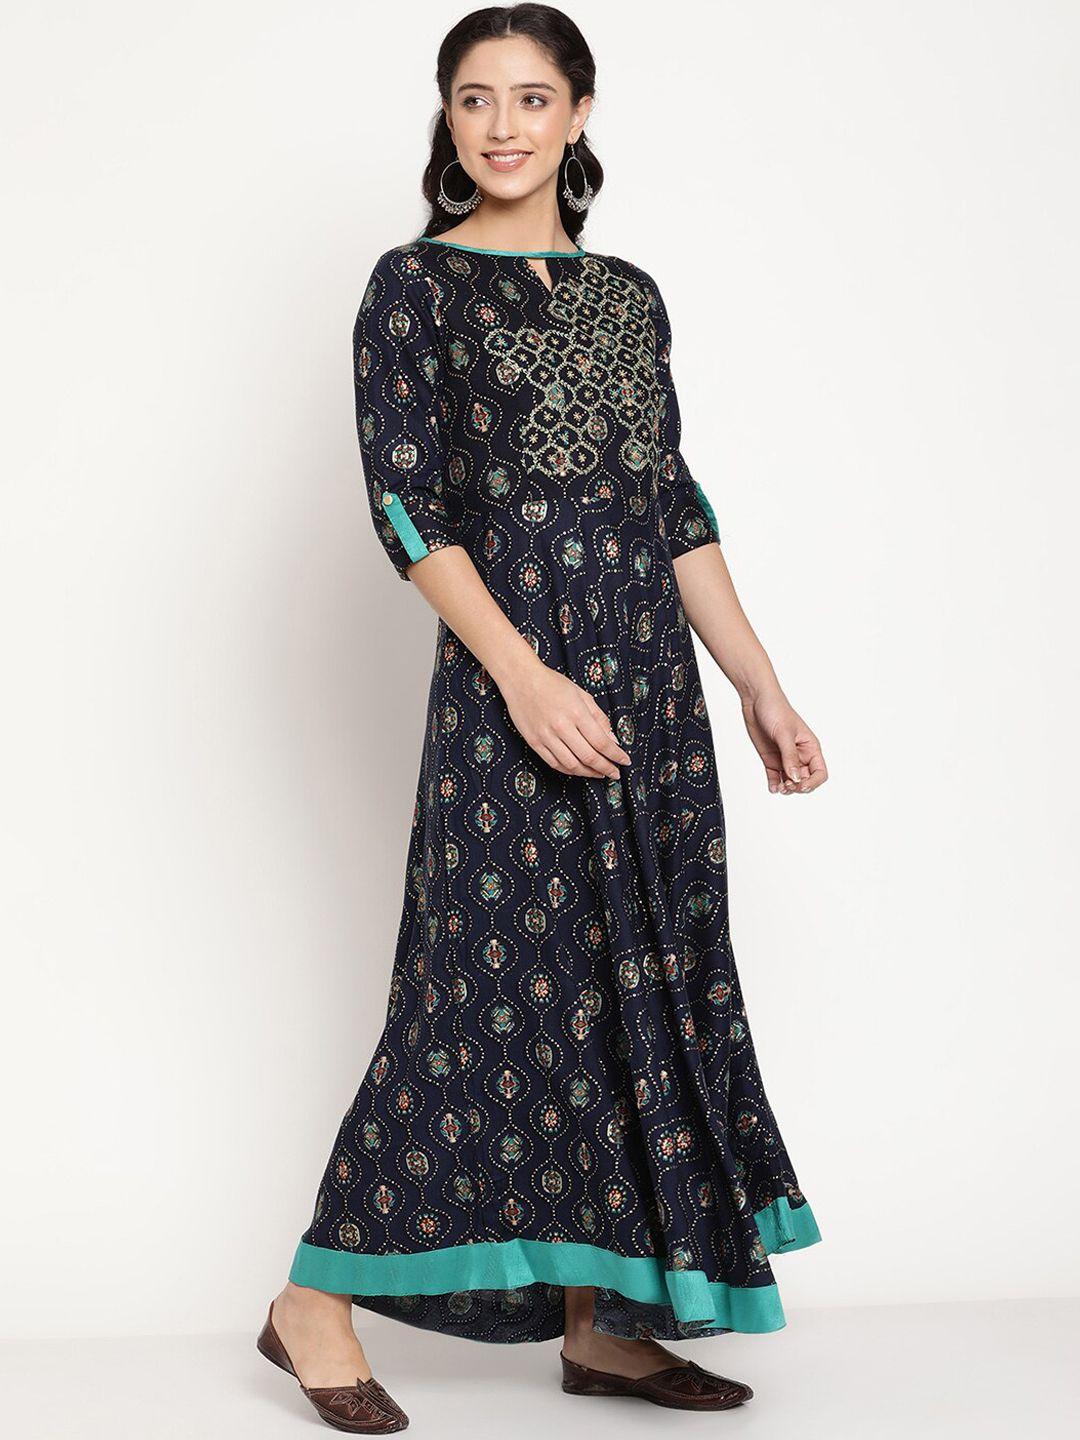 be-indi-women-ethnic-motif-printed-embroidered-detailed-ethnic-dress